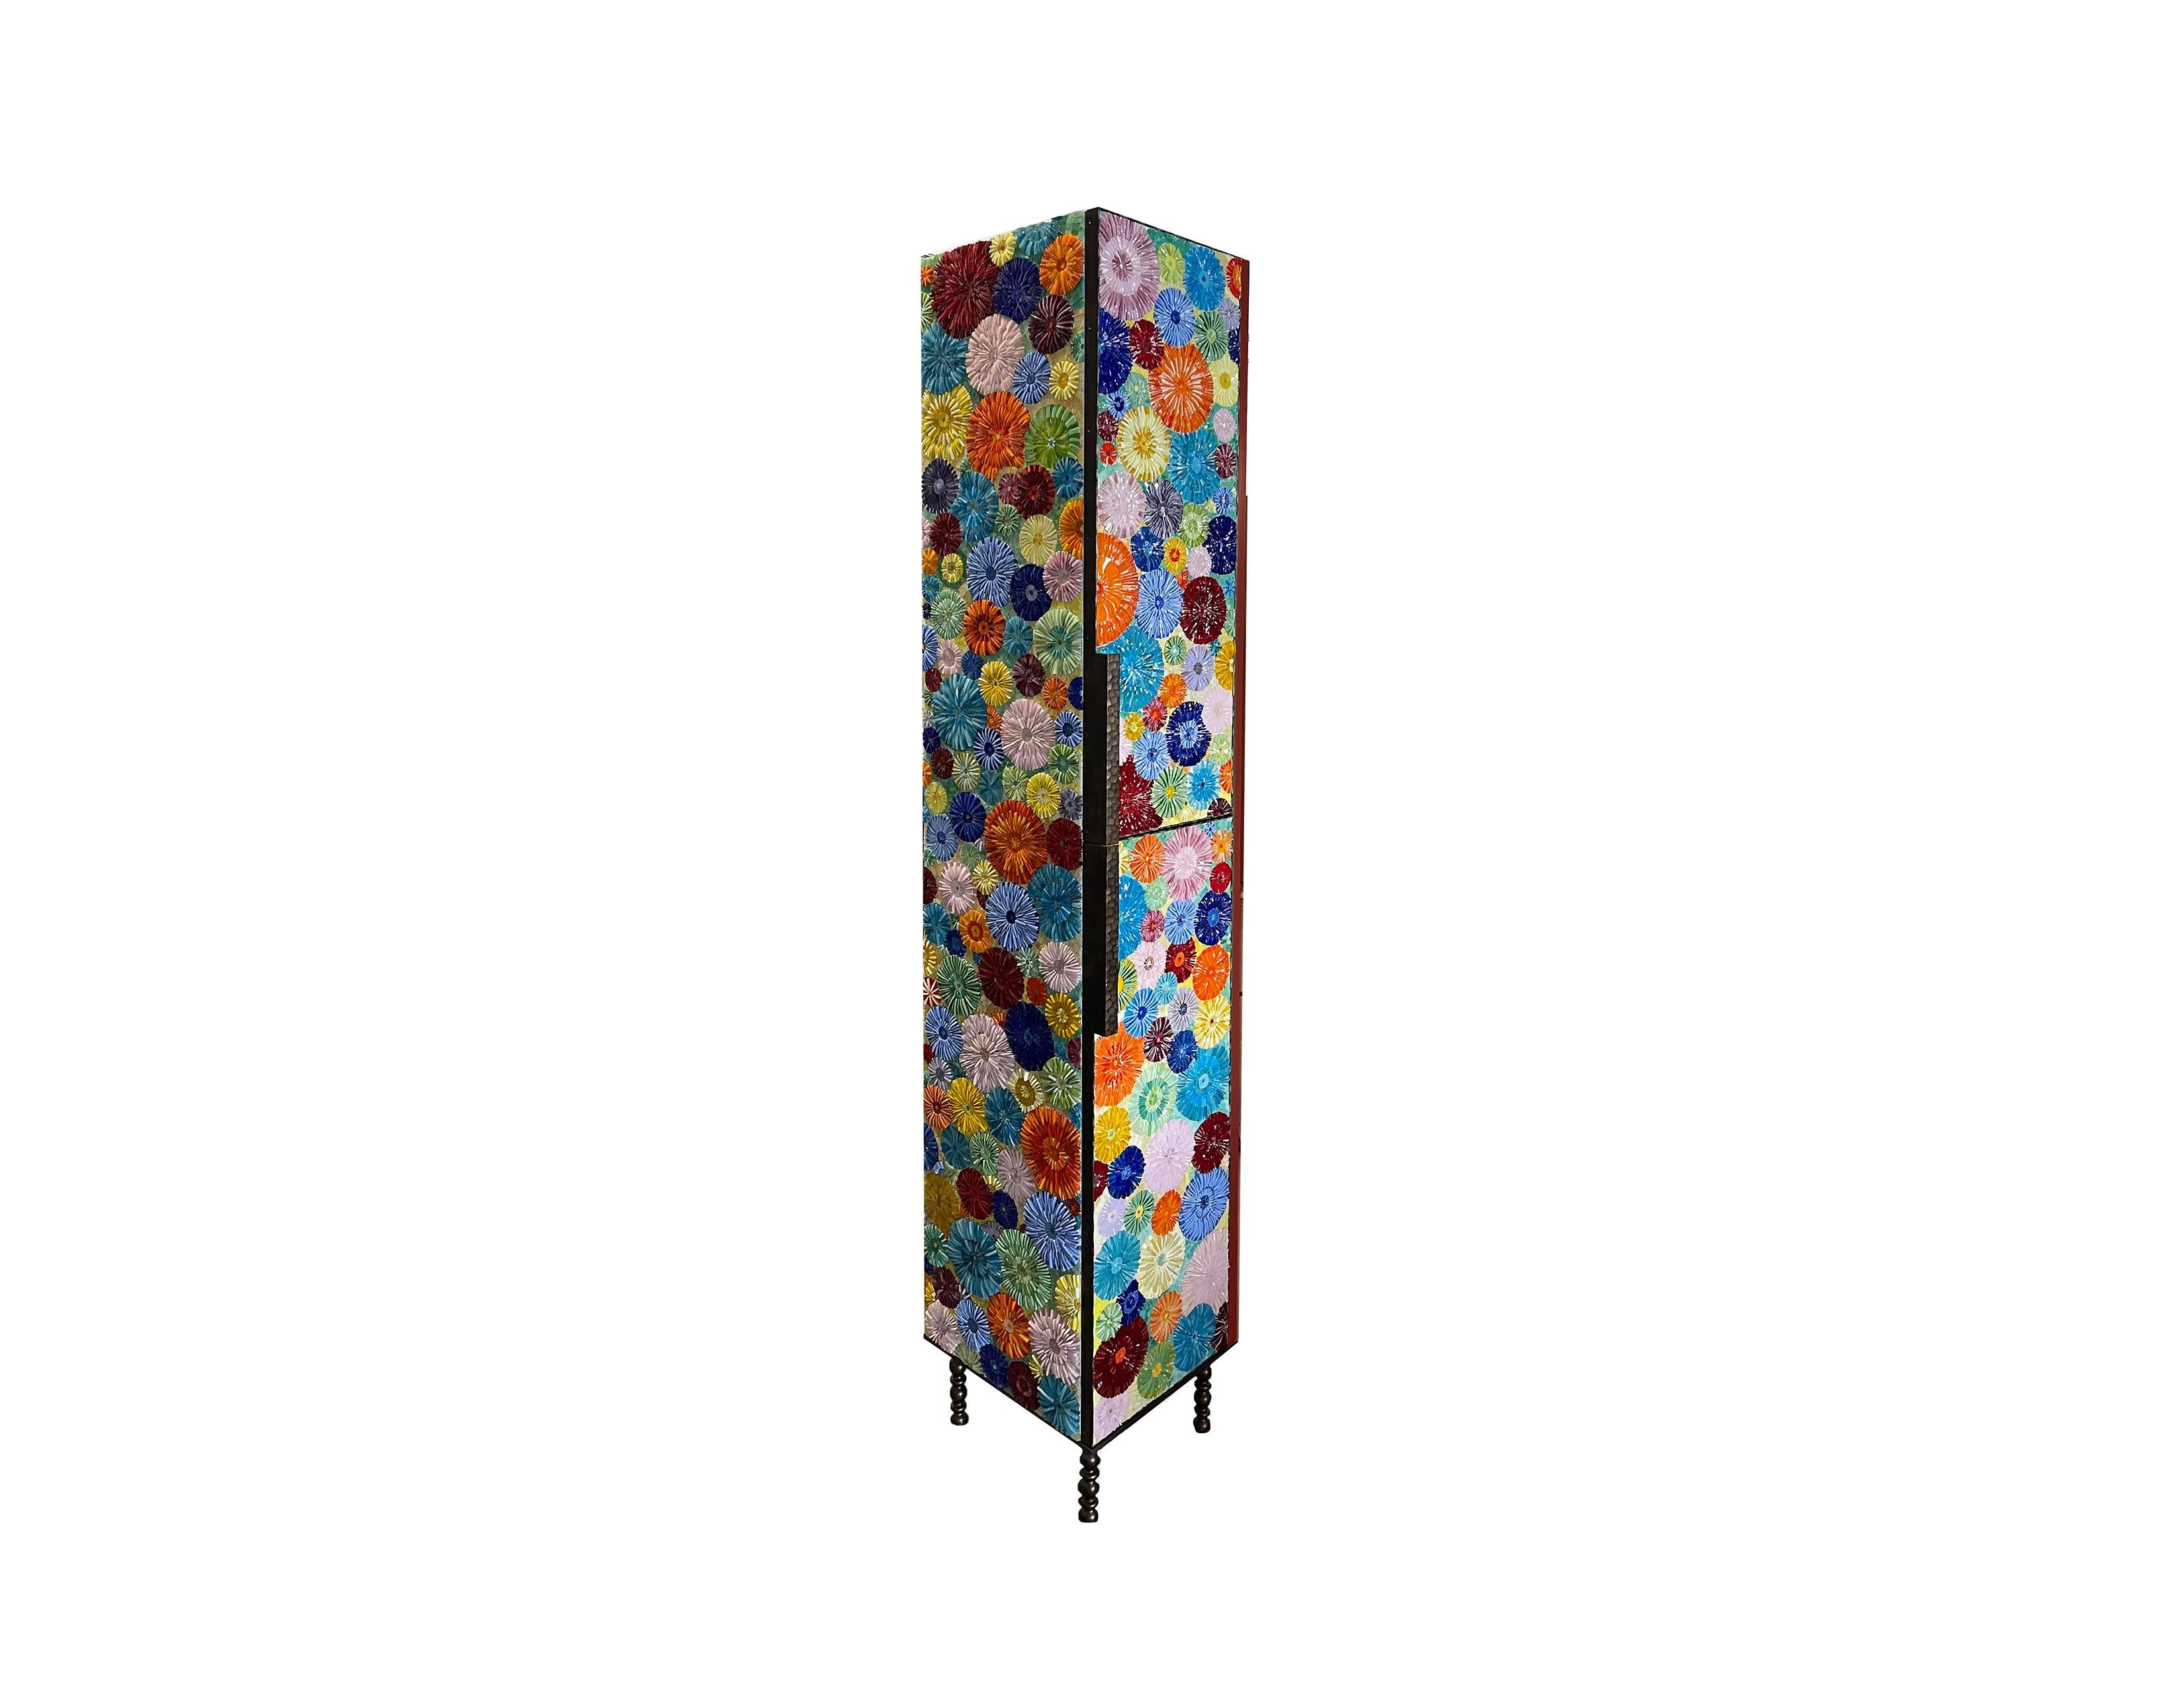 Our custom blossom linen cabinet by Ercole Home is a two-door, six shelf, luxury storage cabinet. Where to begin, the exterior of this piece is covered in our bright, fun, and coloful Ipanema mix inspired by the beaches of Brazil. Each door is